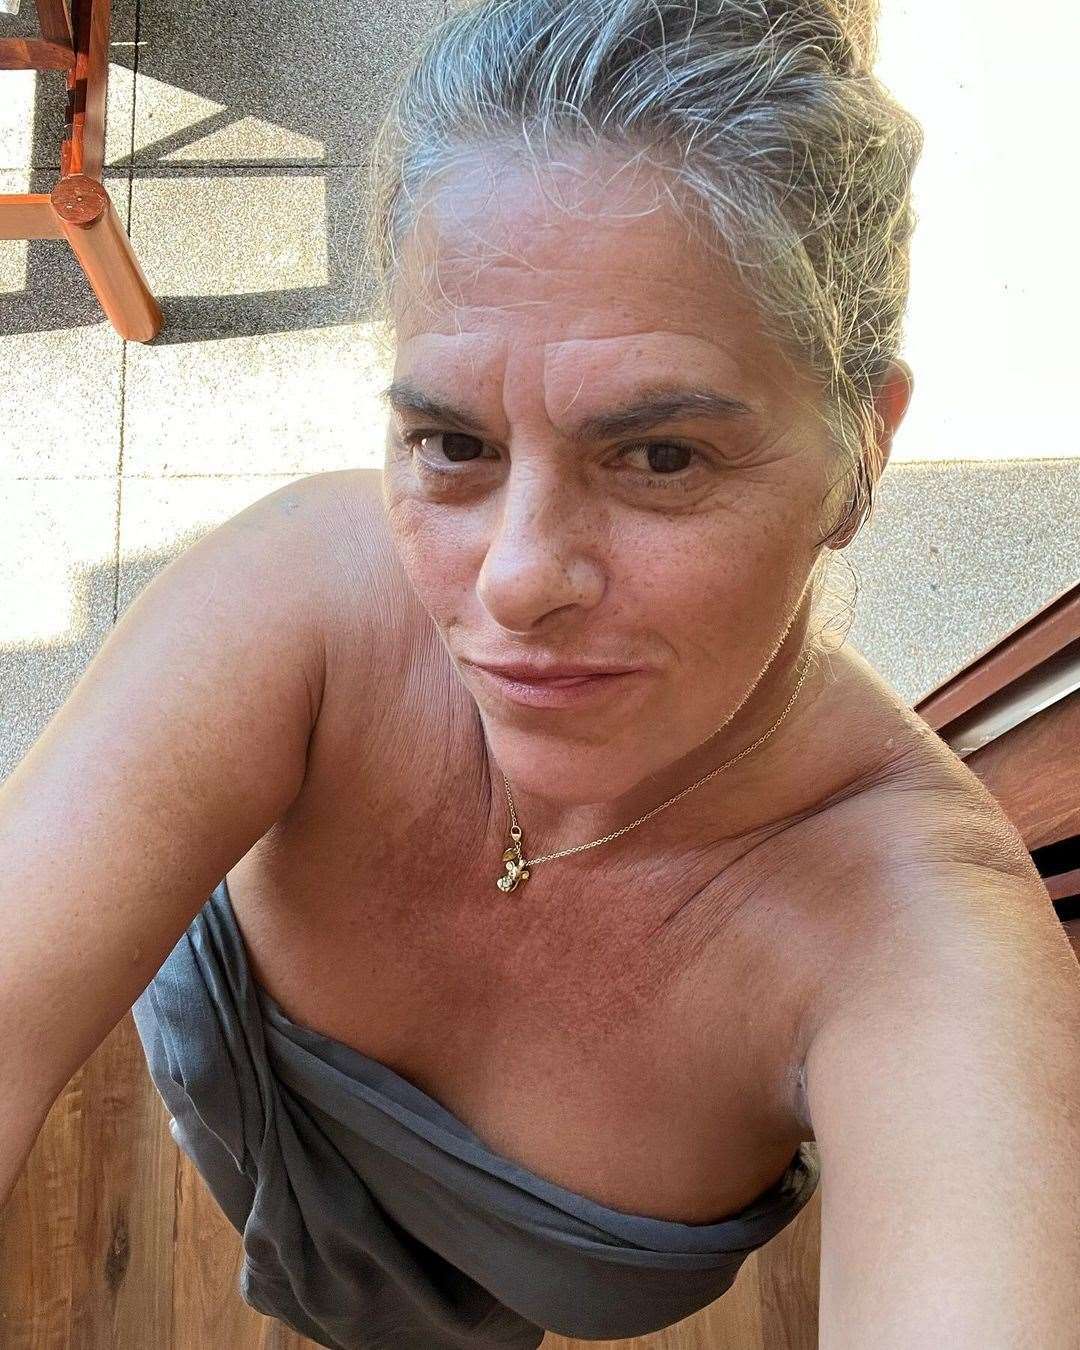 Tracey Emin, who was raised in Margate and moved back to her hometown in 2020, shared this picture after suffering a medical emergency in Thailand. Picture: Tracey Emin